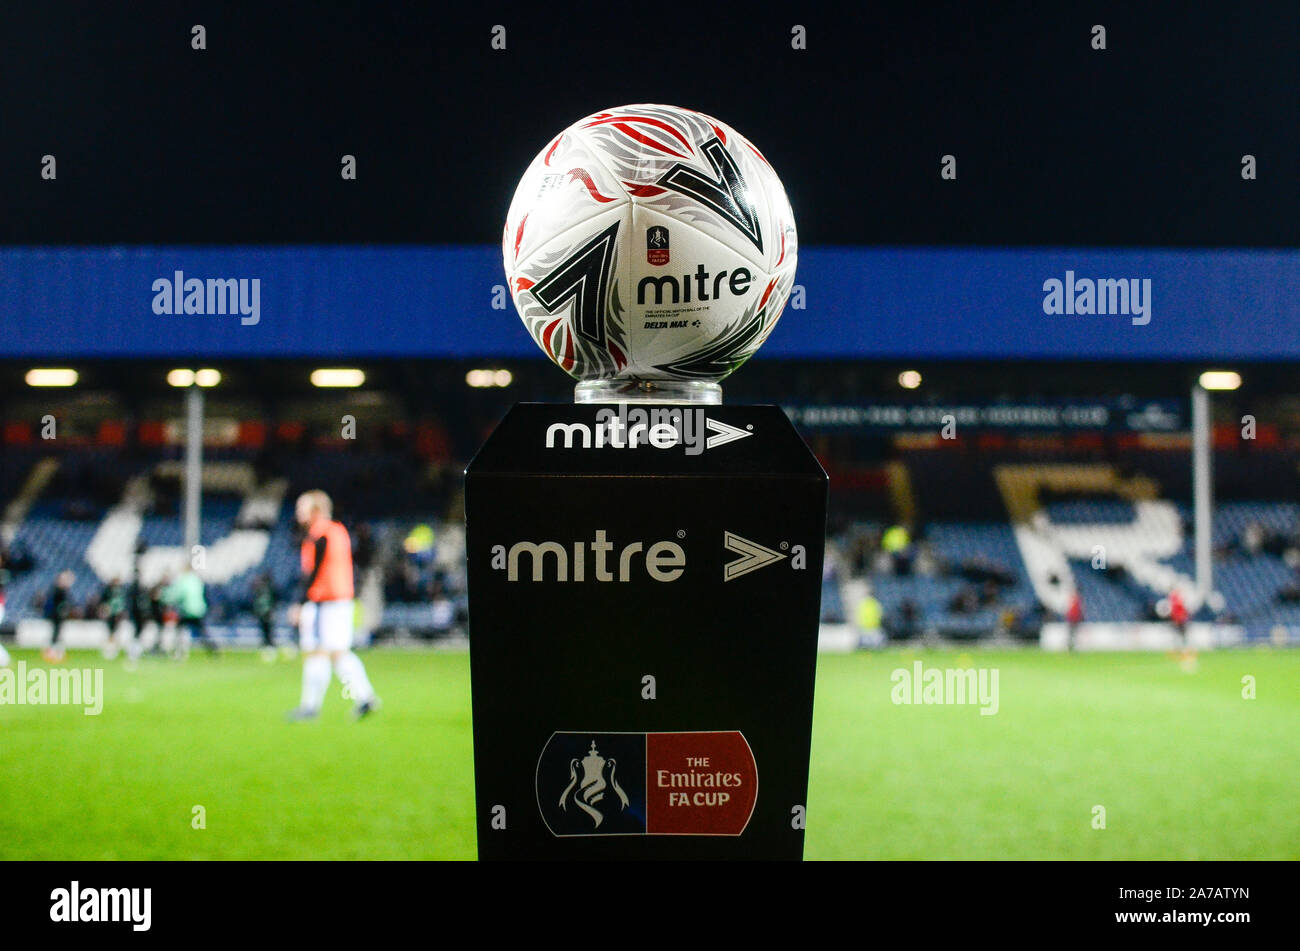 LONDON, ENGLAND - FEBRUARY 15, 2019: The official match ball pictured prior to the 2018/19 FA Cup Fifth Round game between Queens Park Rangers FC and Watford FC at Loftus Road Stadium. Stock Photo